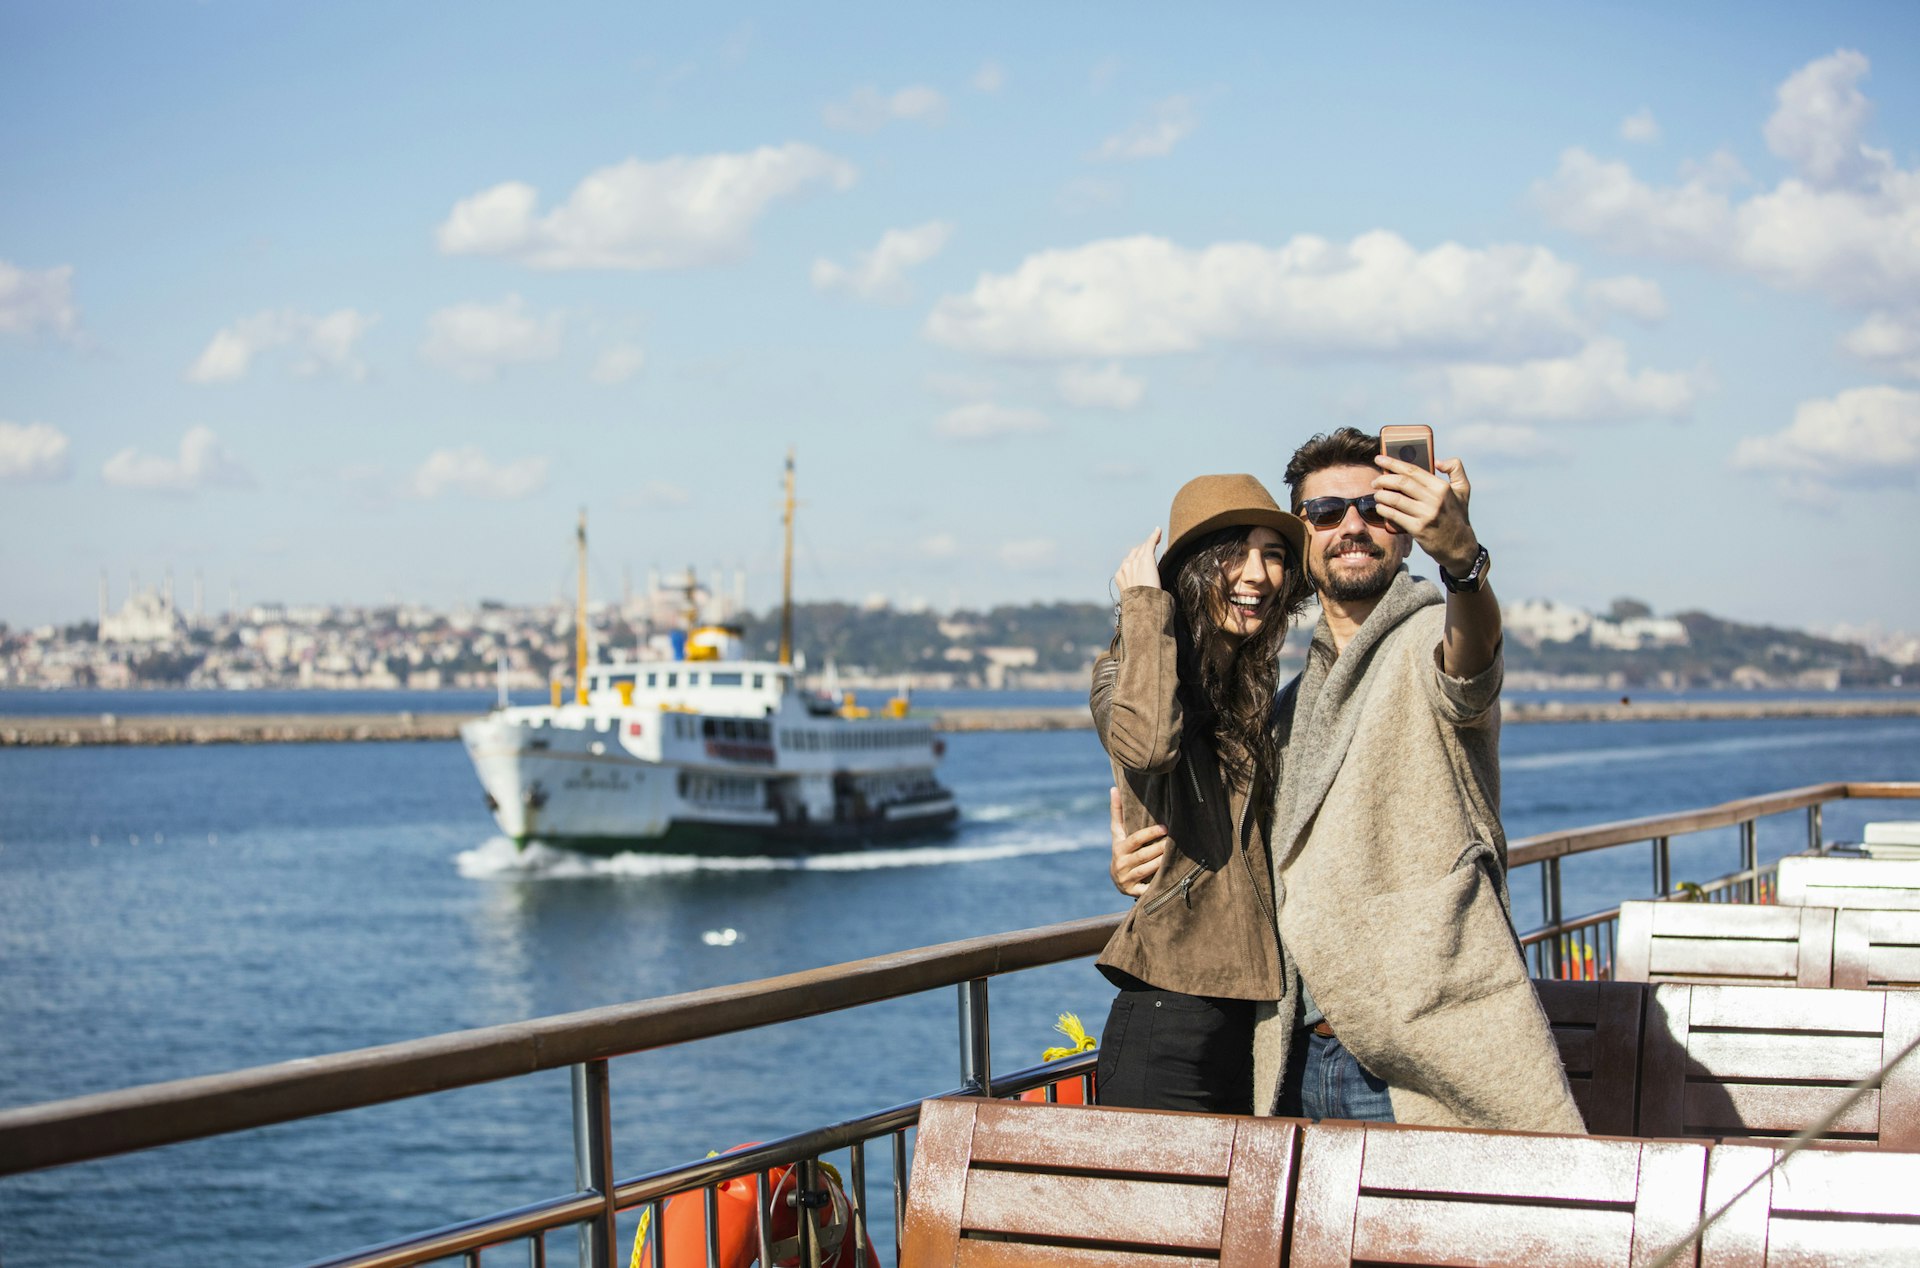 A couple take a smiling selfie as they ride on the ferry with the Istanbul skyline in the background